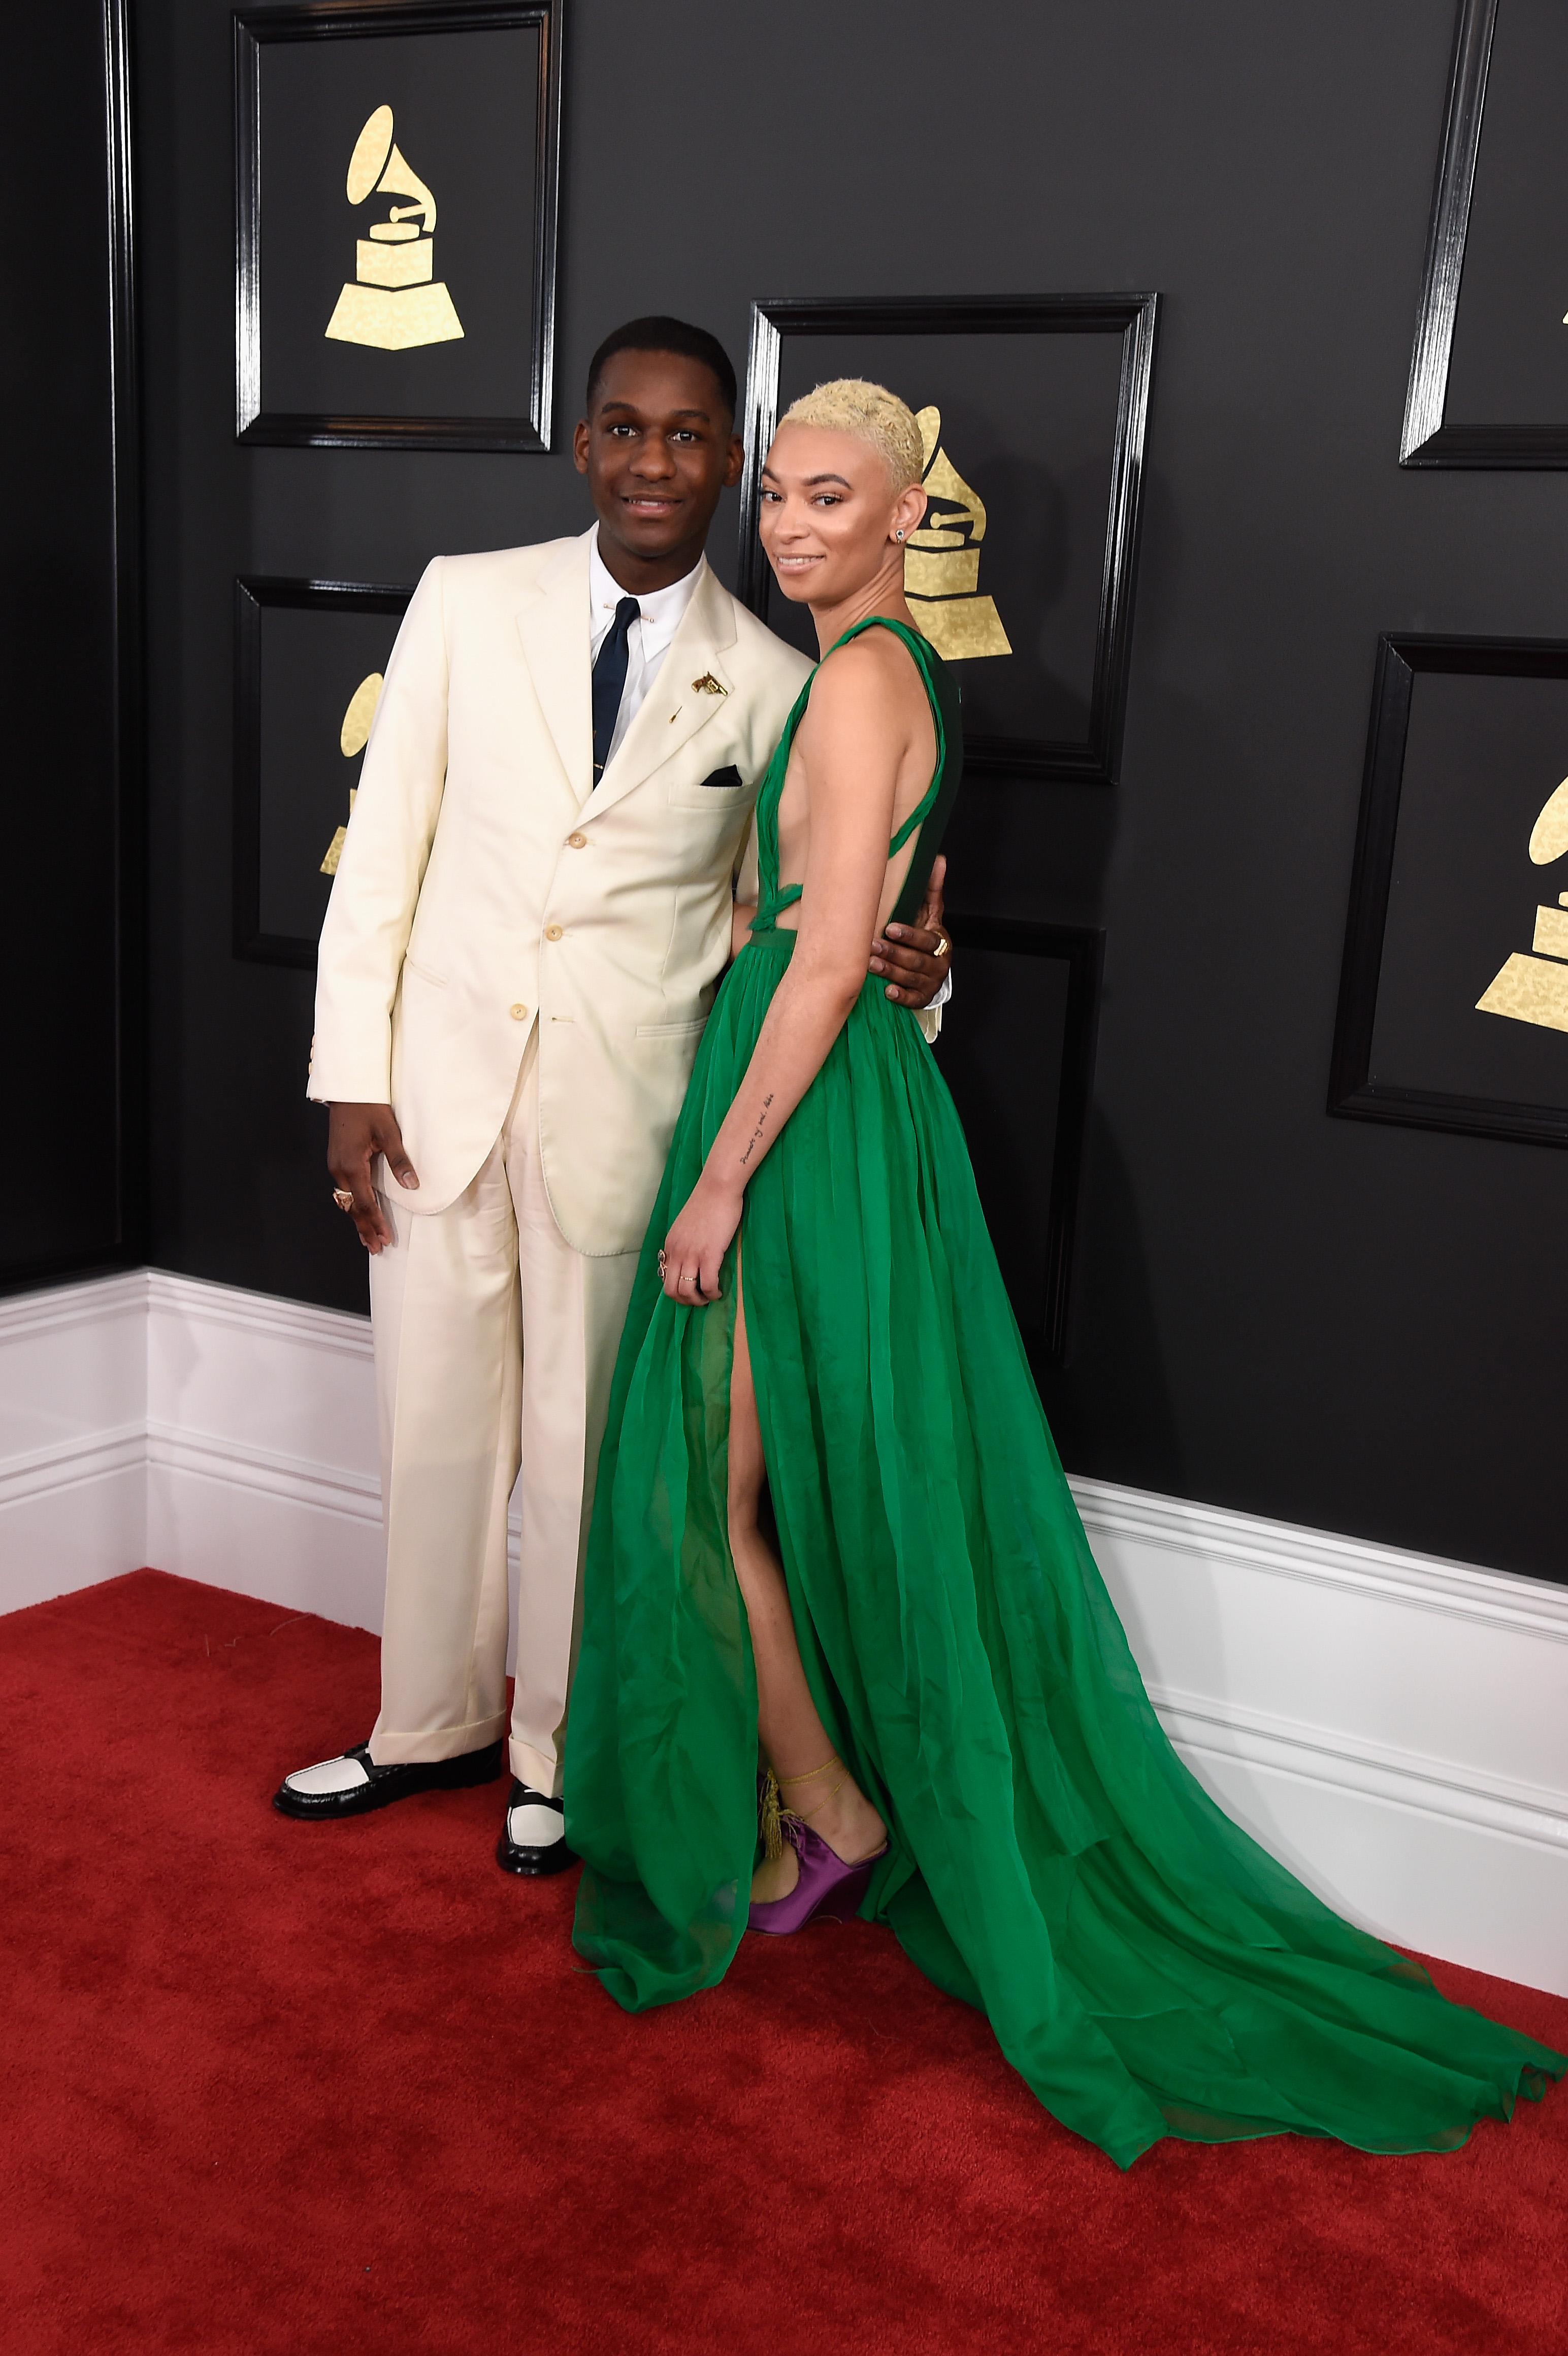 Leon Bridges and Brittni Jessie attend the 59th GRAMMY Awards at STAPLES Center, on Feb. 12, 2017 in Los Angeles.